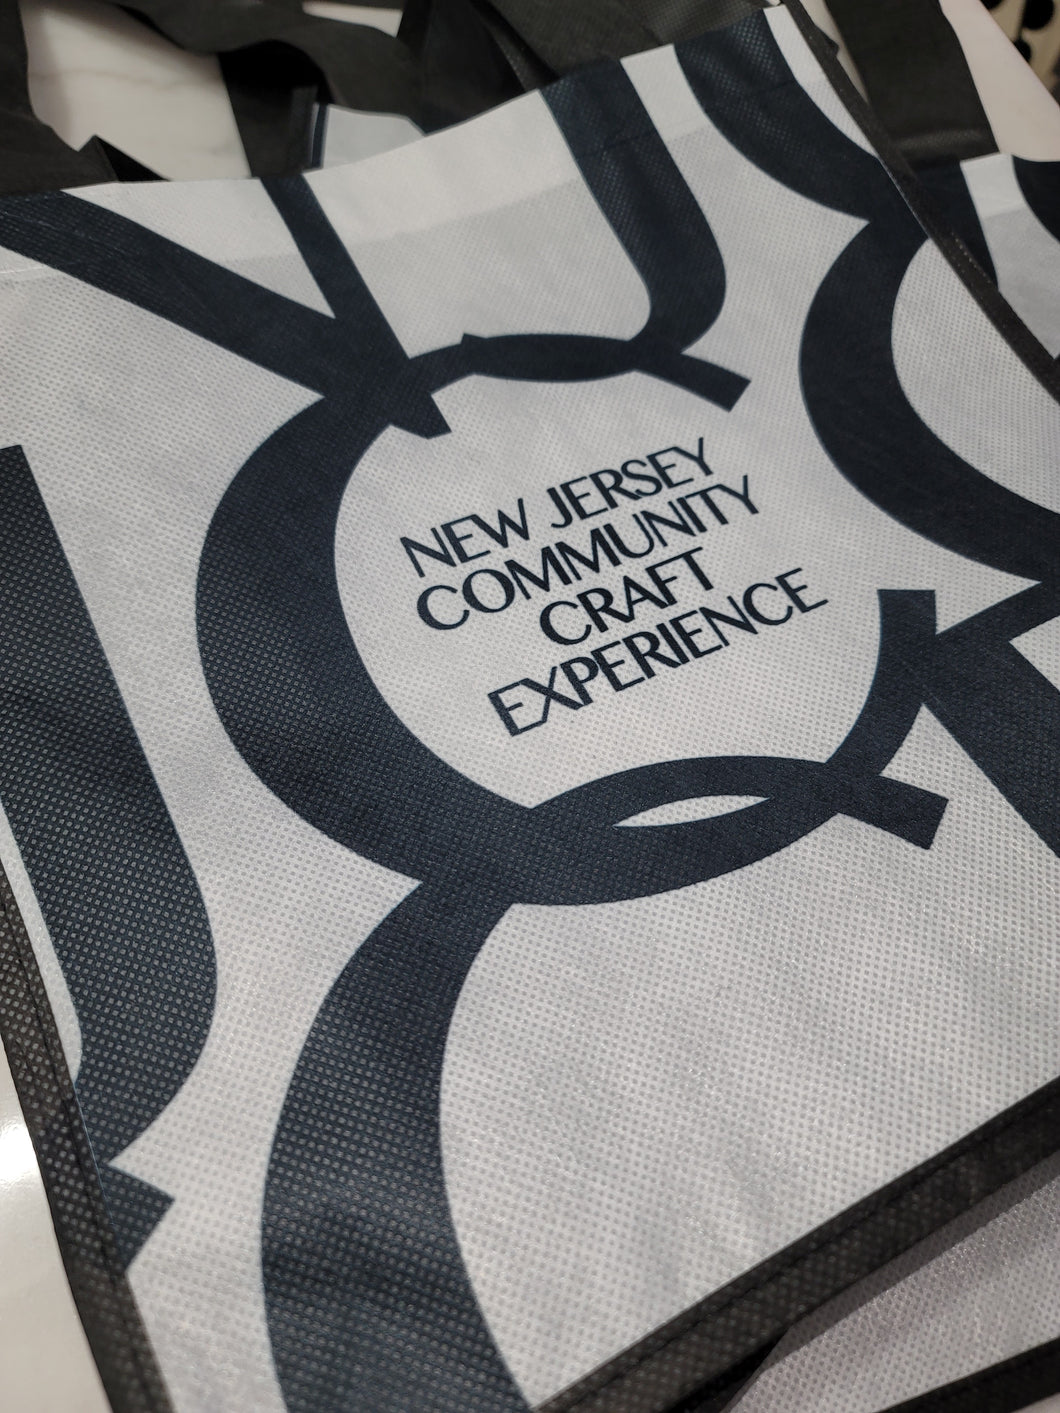 NJCCE Tote Bag (New Jersey Community Craft Experience)